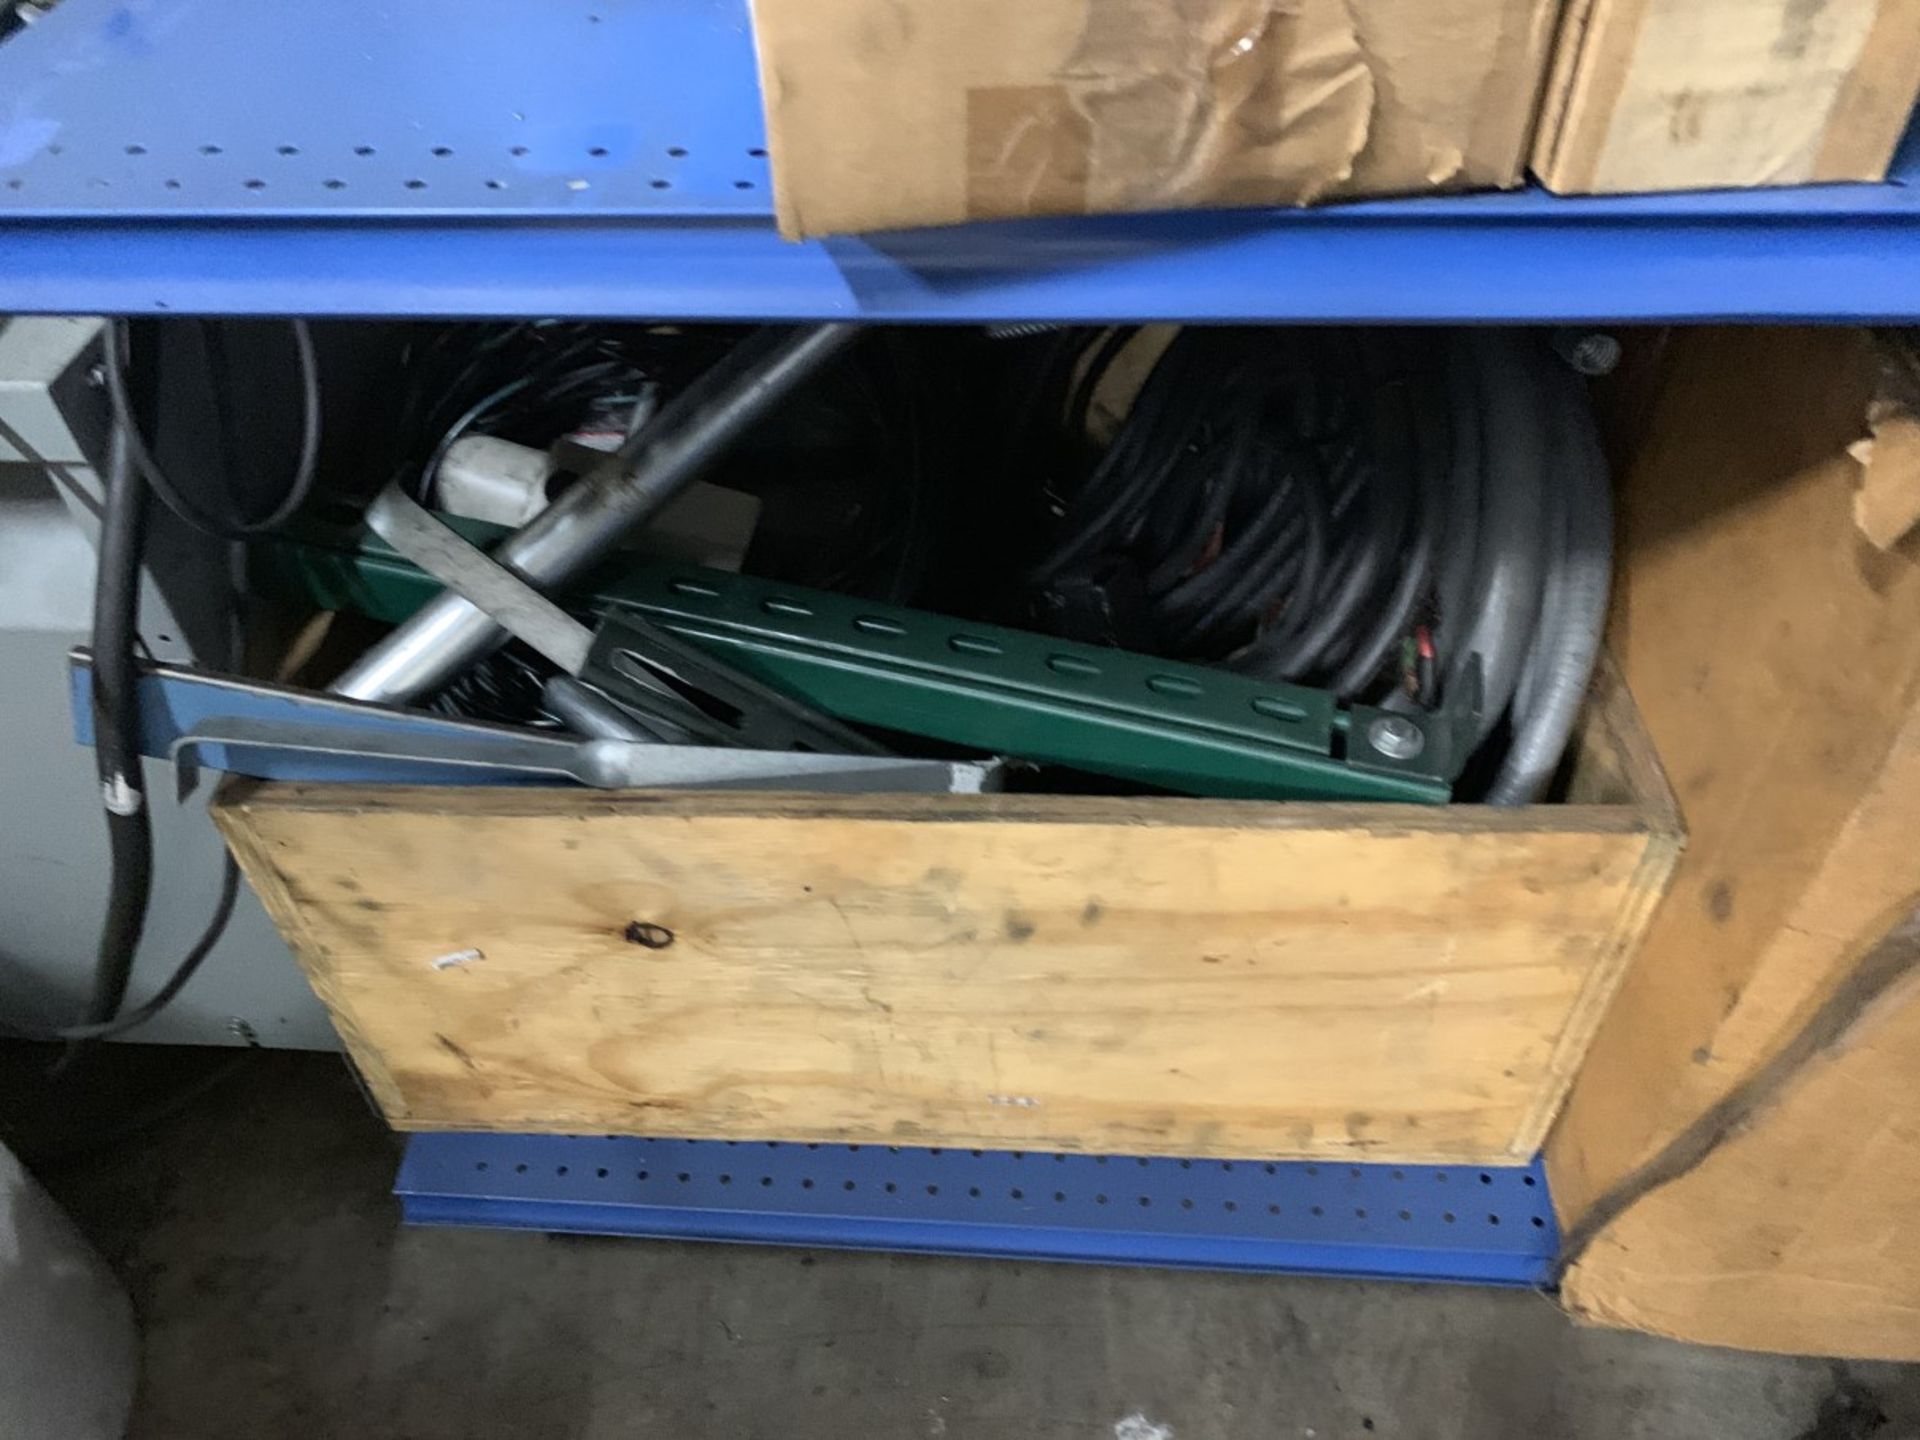 Shop Racking Units w/ Contents Including Grinding Wheels, Hose, Electrical, Wire (Located at: R & - Image 4 of 6